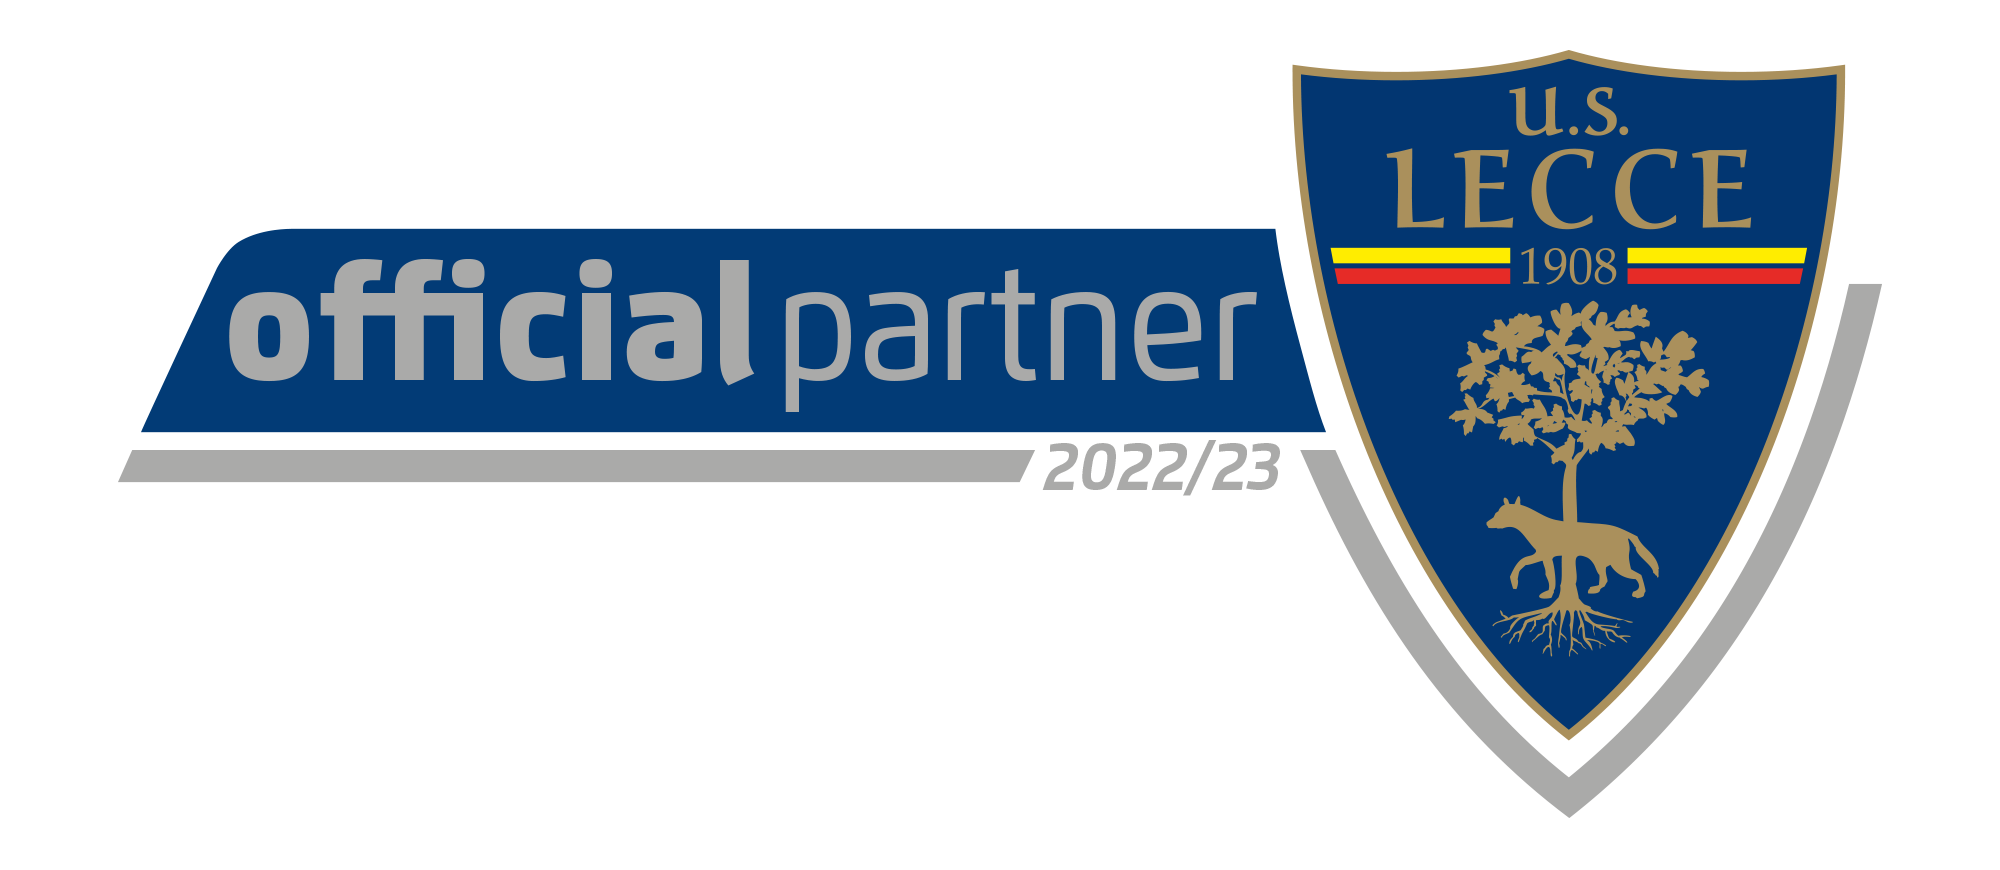 official partner us Lecce